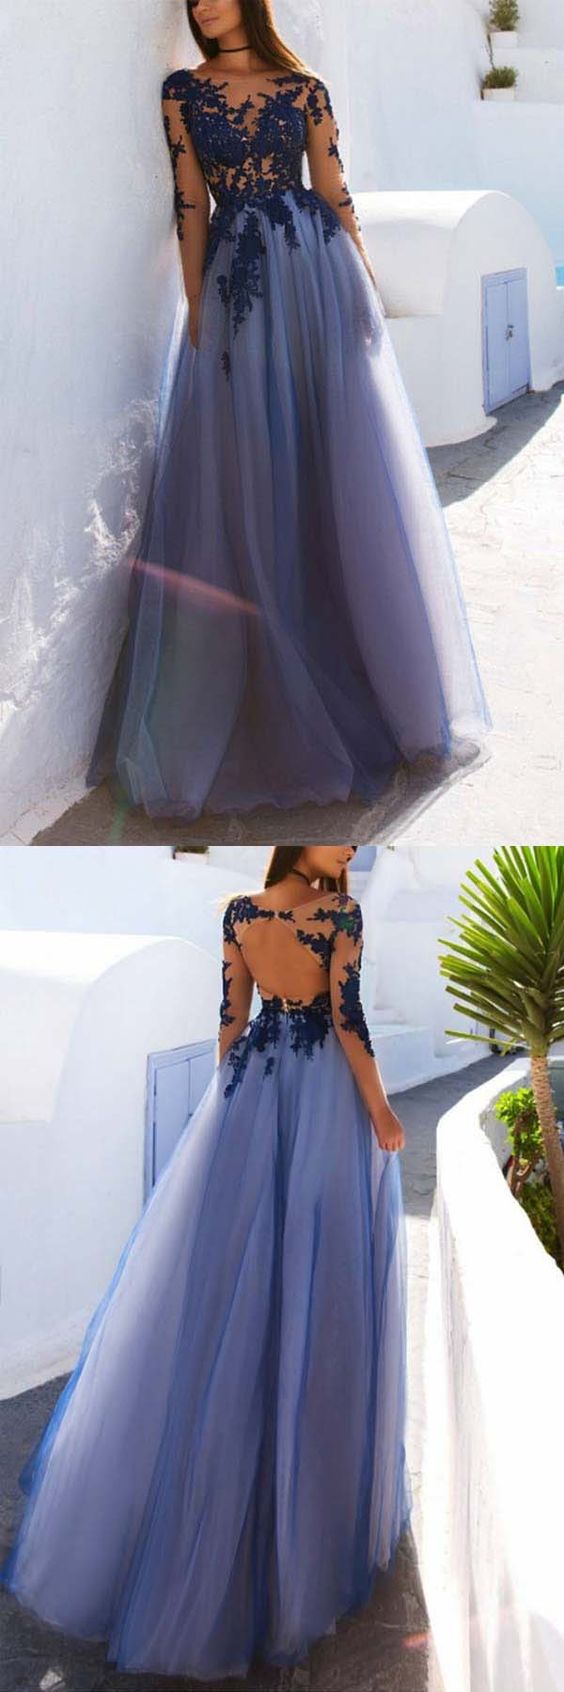 Vampal Just My Style Light Blue Tulle Fabric Lace Top Open Back Prom Dress